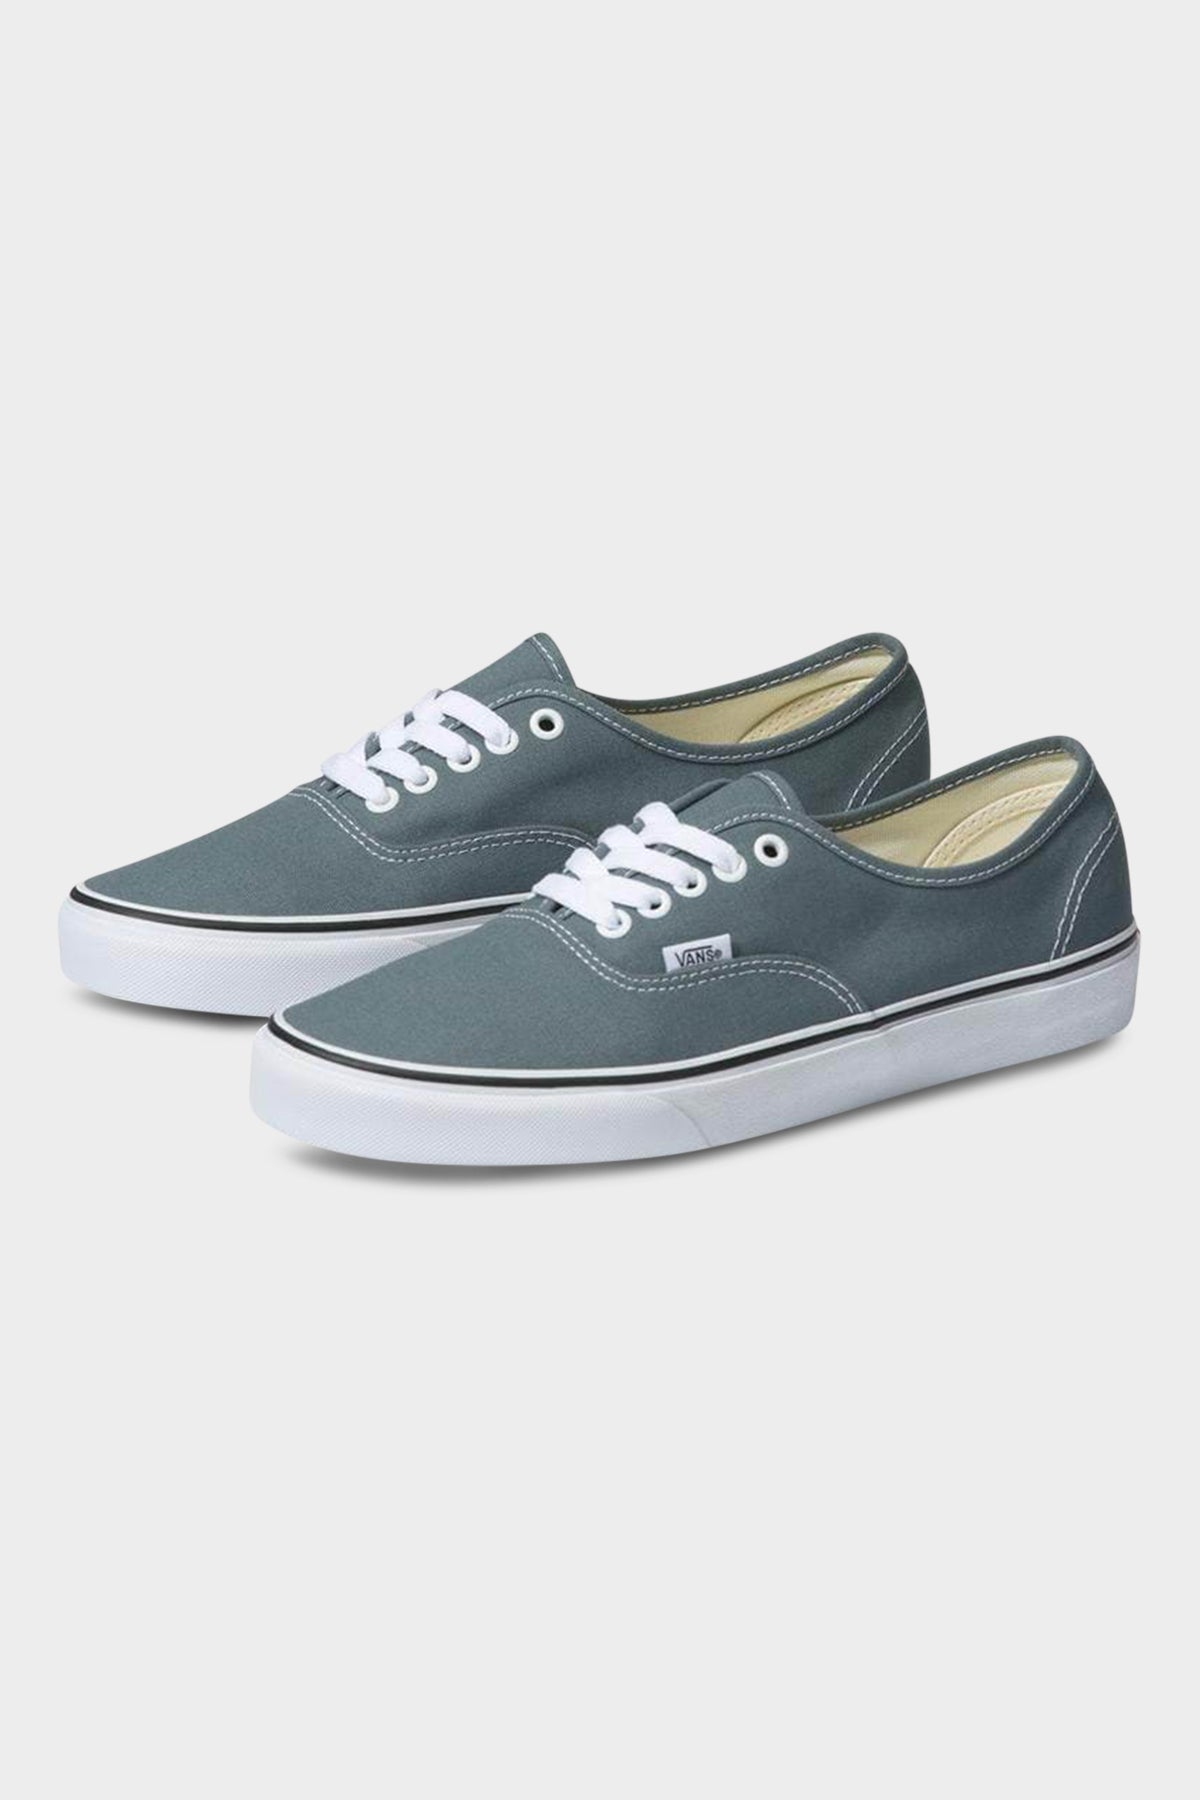 Vans Authentic Color Theory Stormy Weather